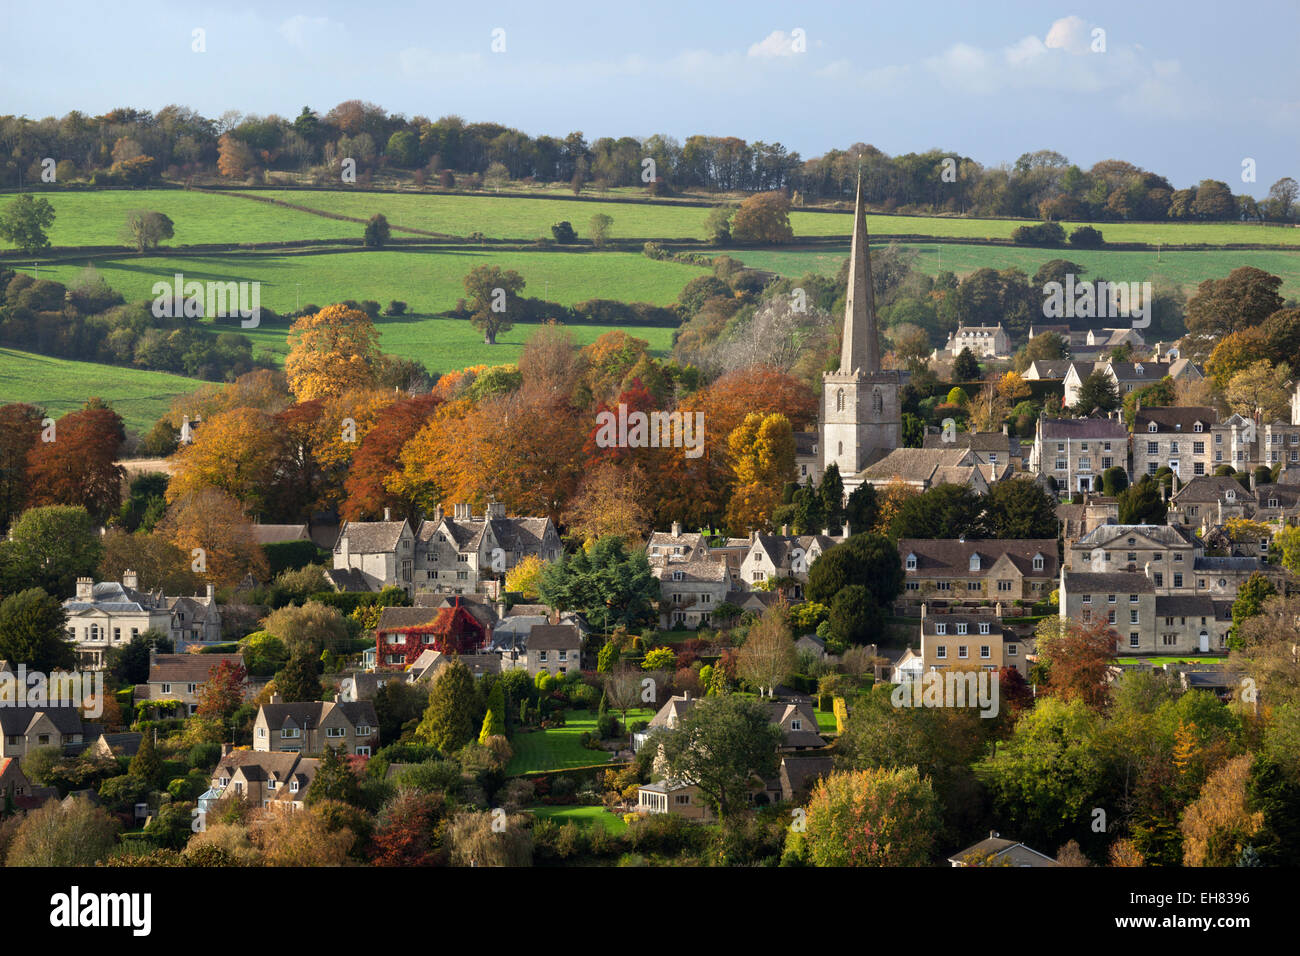 St. Mary's Parish Church and Village in autumn, Painswick, Cotswolds, Gloucestershire, England, United Kingdom, Europe Stock Photo